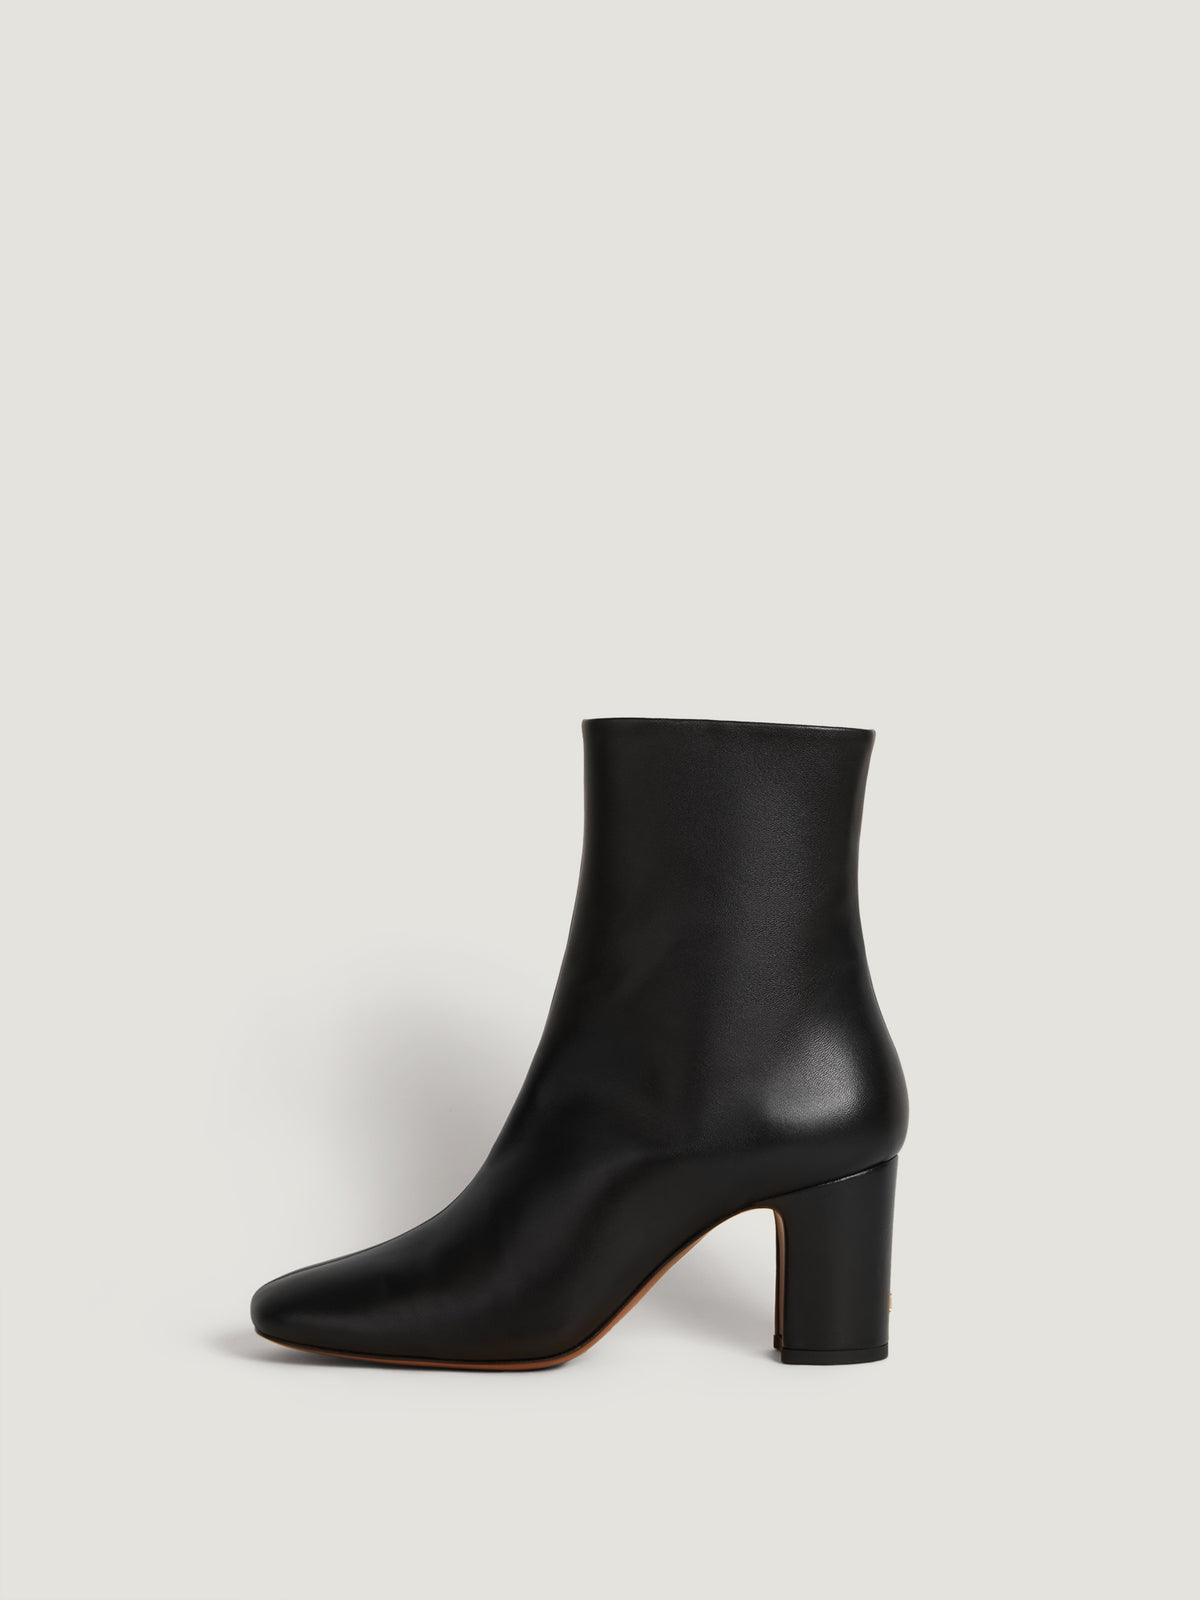 The Darcy Ankle Boot in Leather